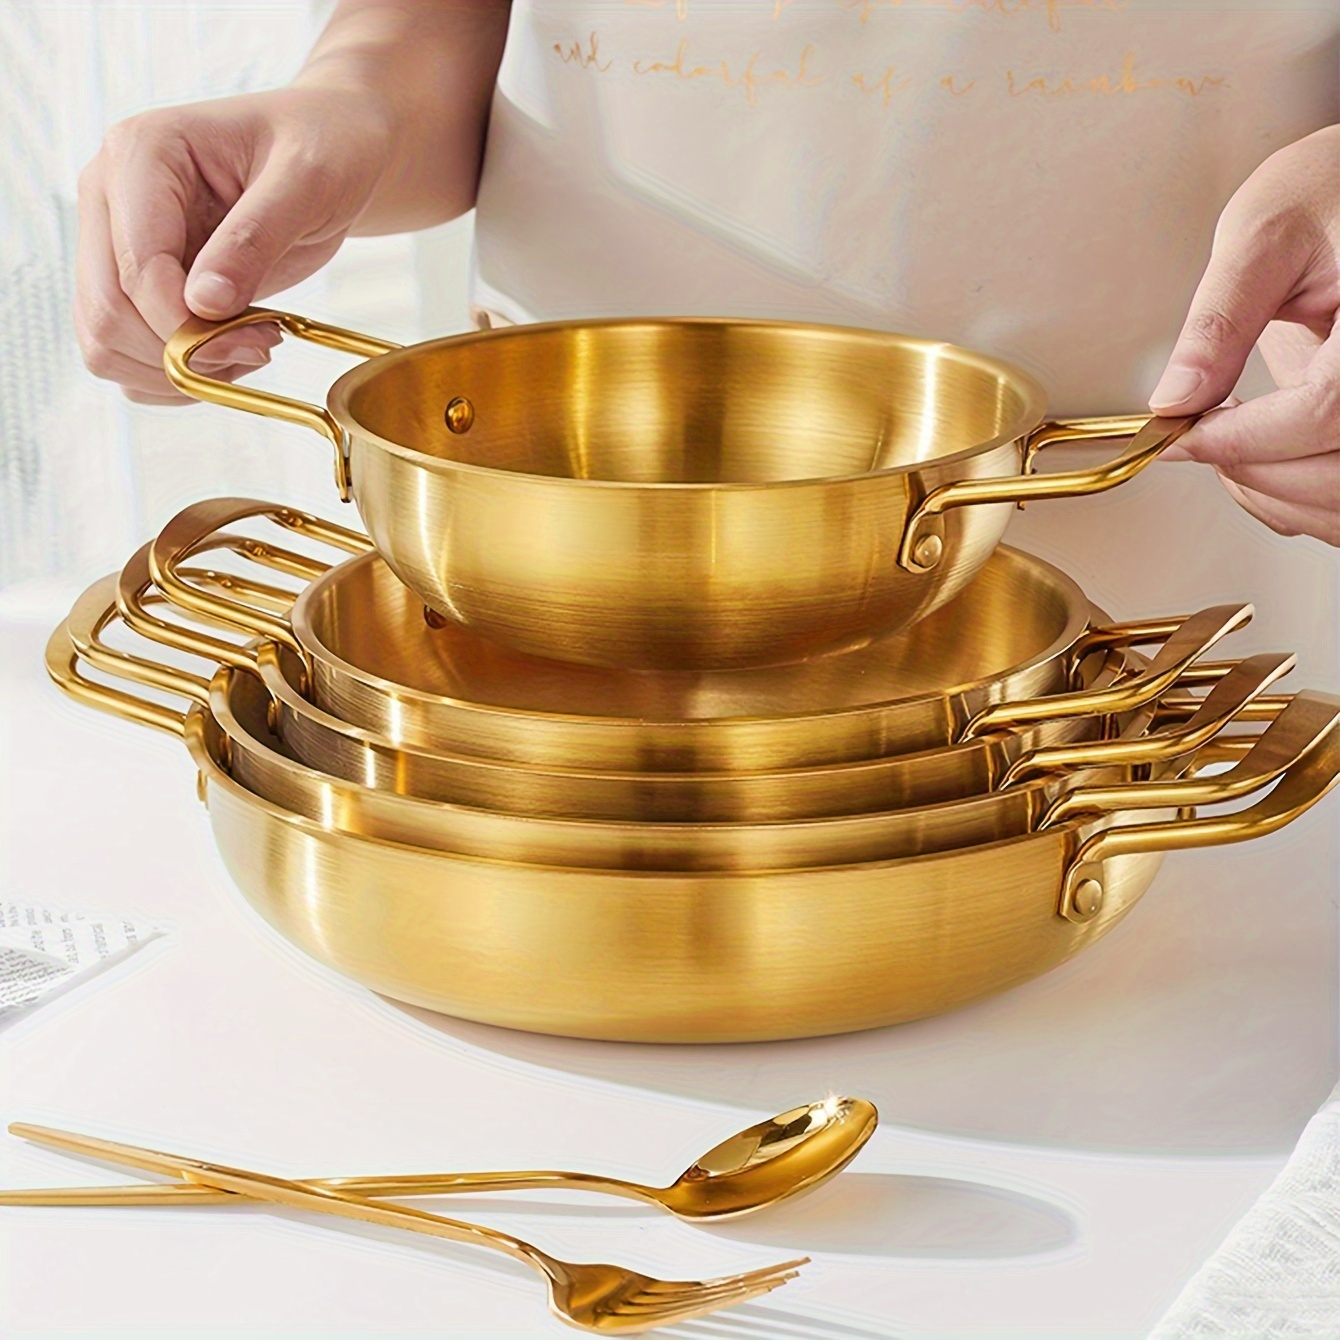 

Versatile Stainless Steel Golden Ramen & Hot Pot - Perfect For Soup, Seafood, And Crayfish Cooking - Gas Stove Compatible Kitchenware